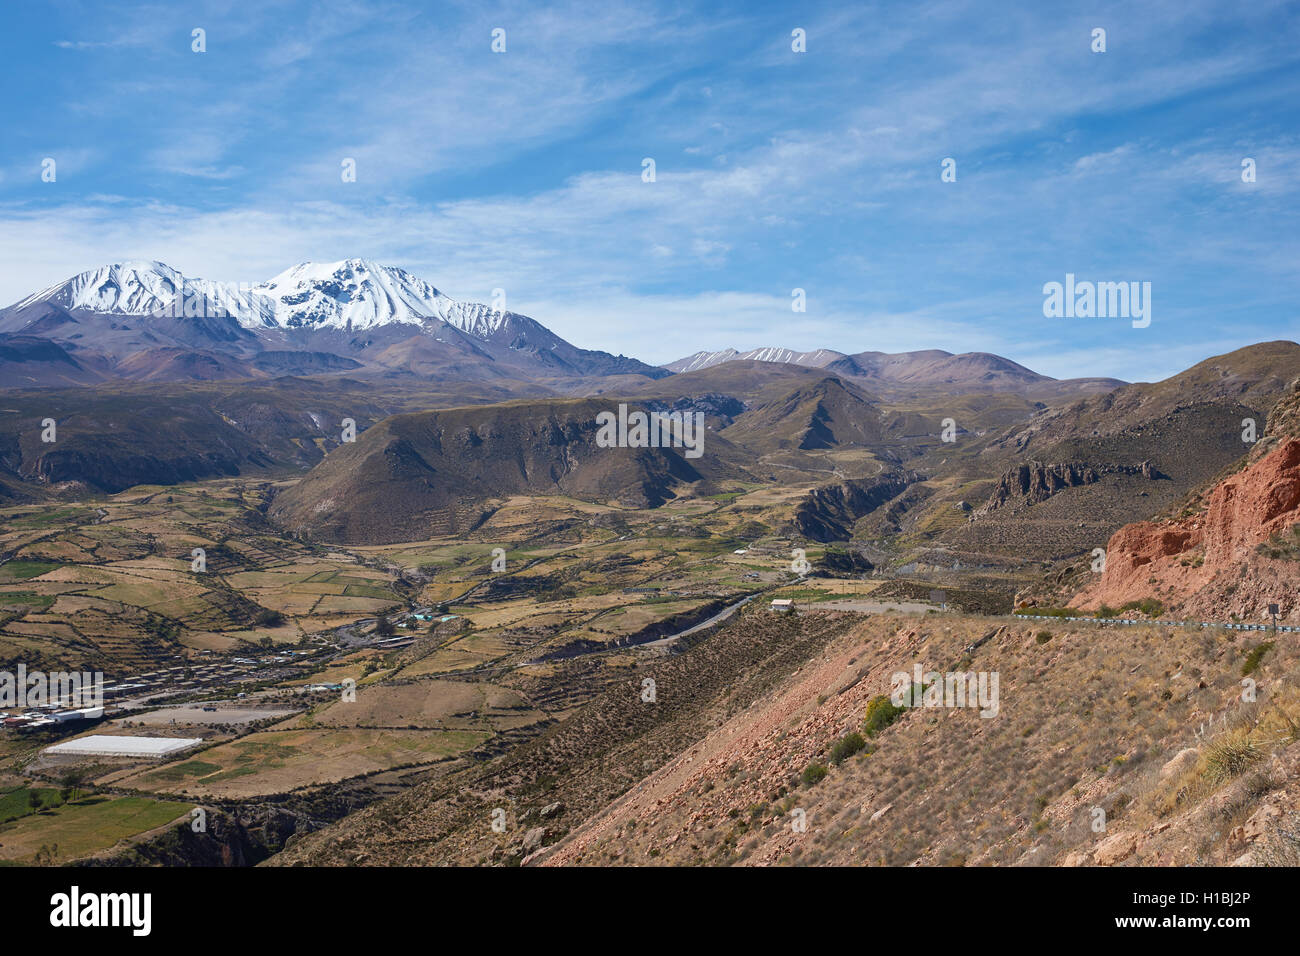 Small town of Putre in the Parinacota region of northern Chile. Stock Photo